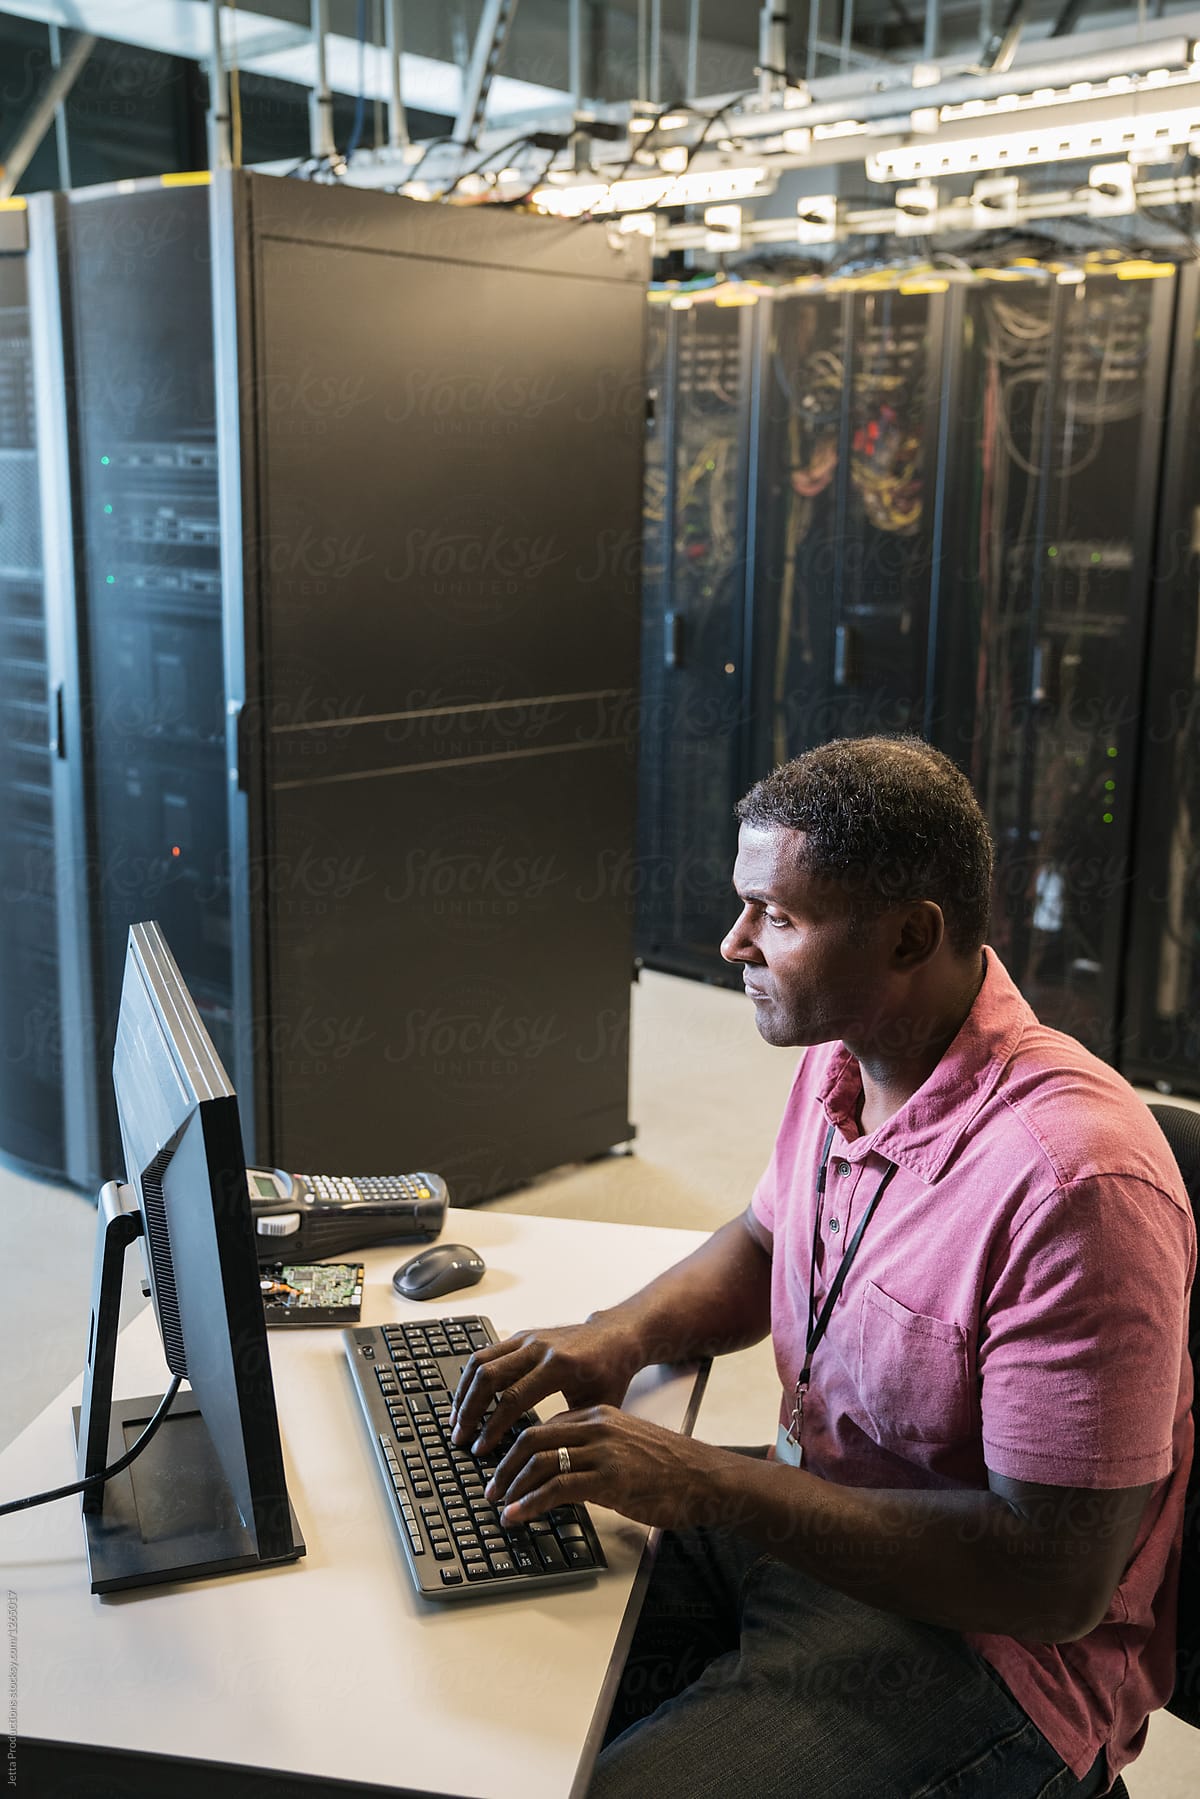 Black male technician works at a computer in a server room